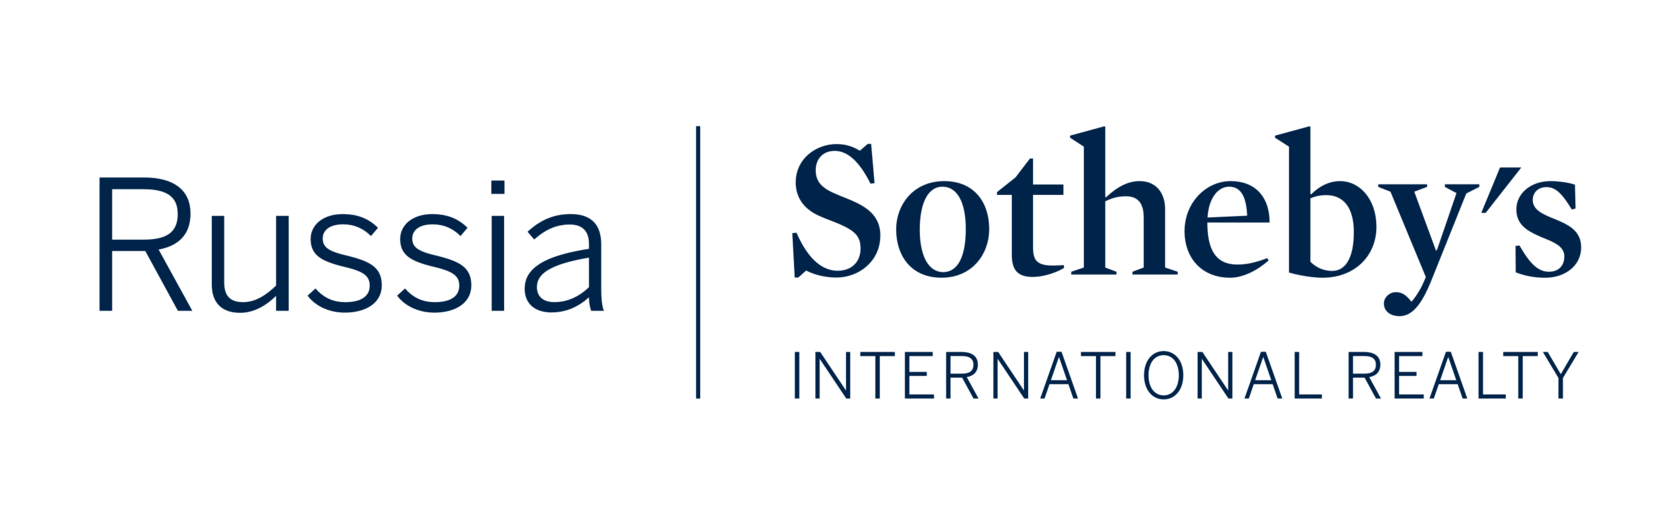 Russia Sotheby's International Realty